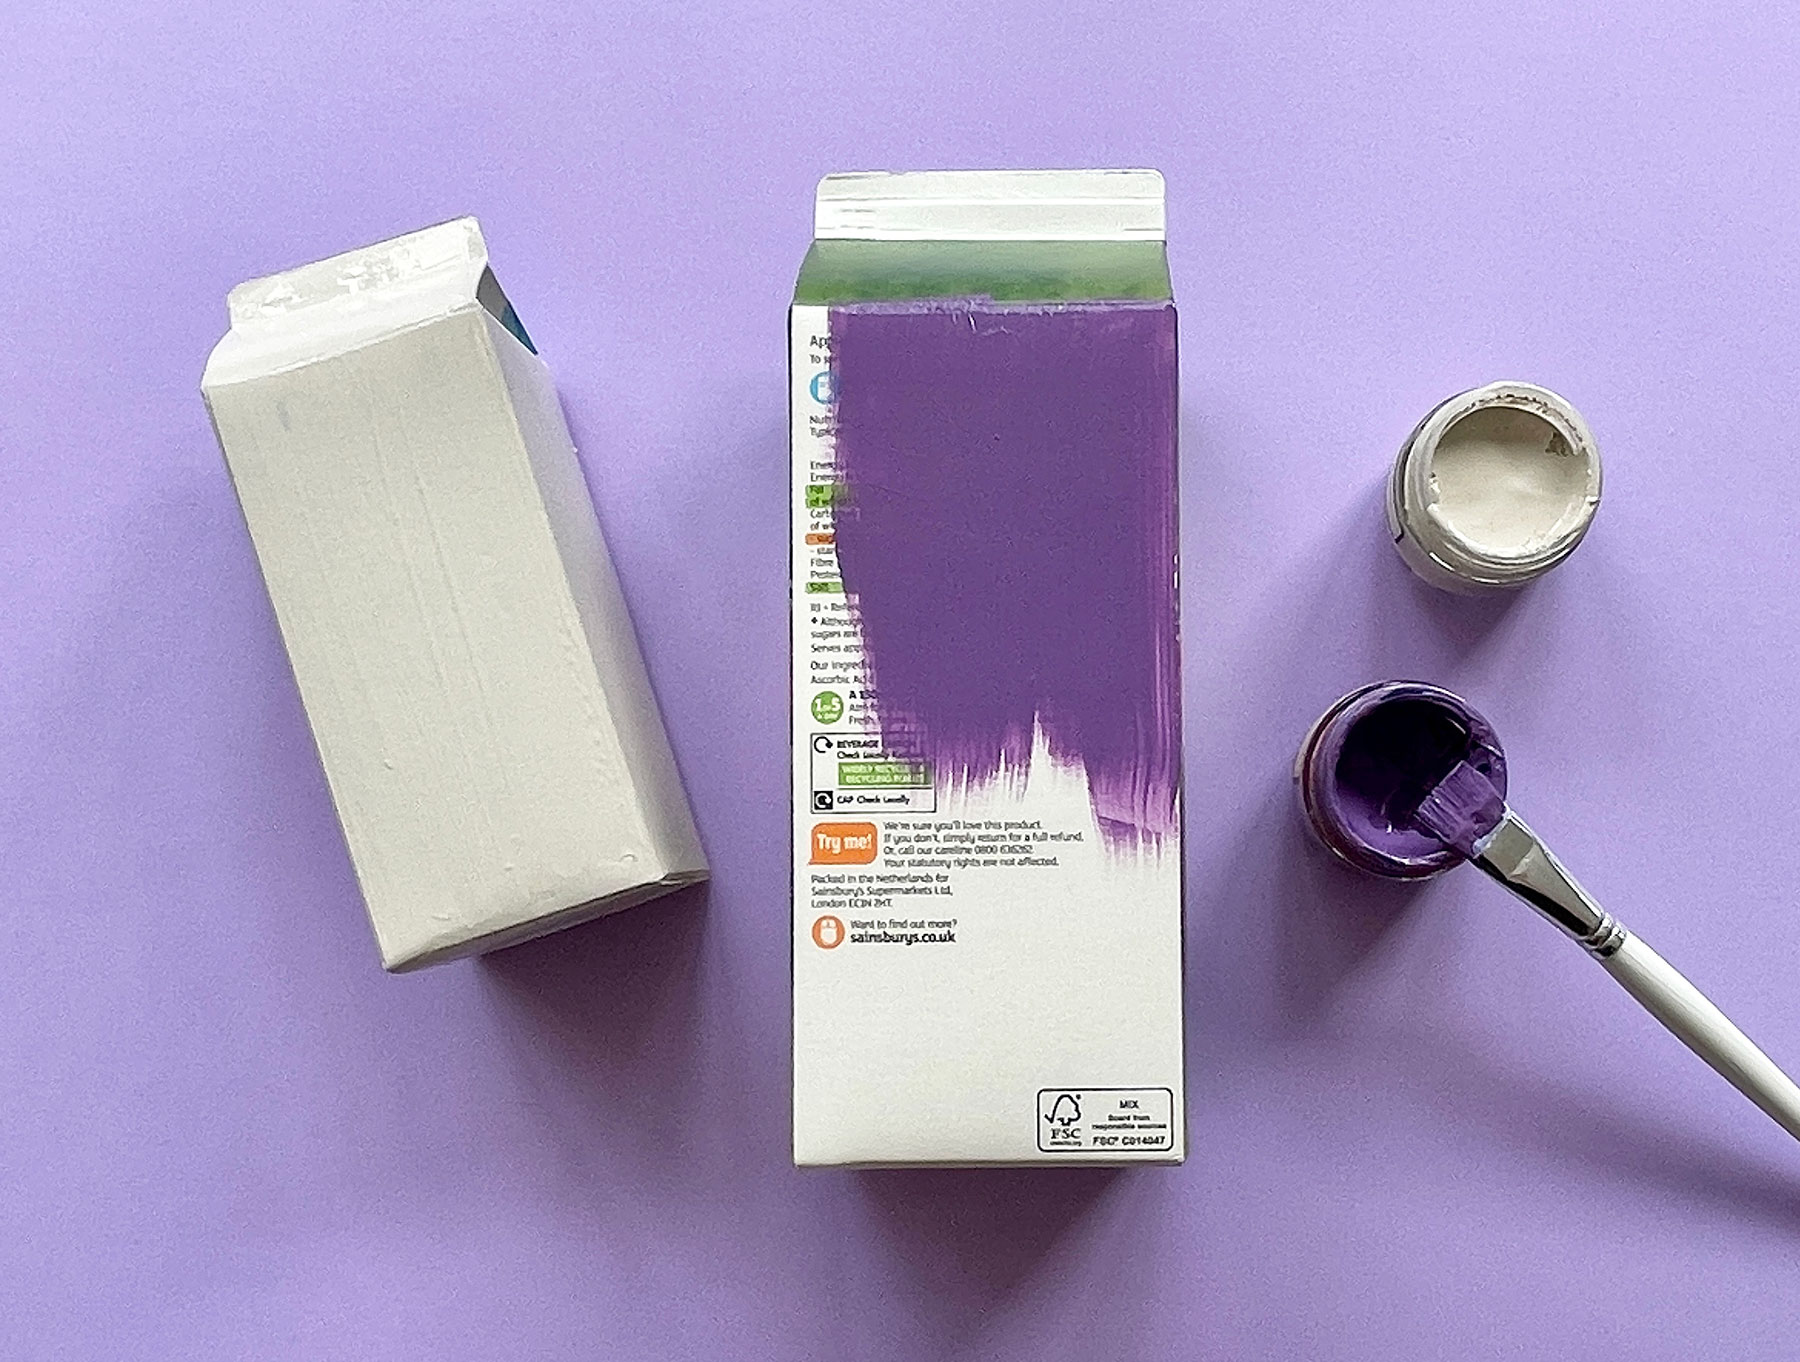 A photo of two juice cartons being painted with purple and grey paint on a light purple background